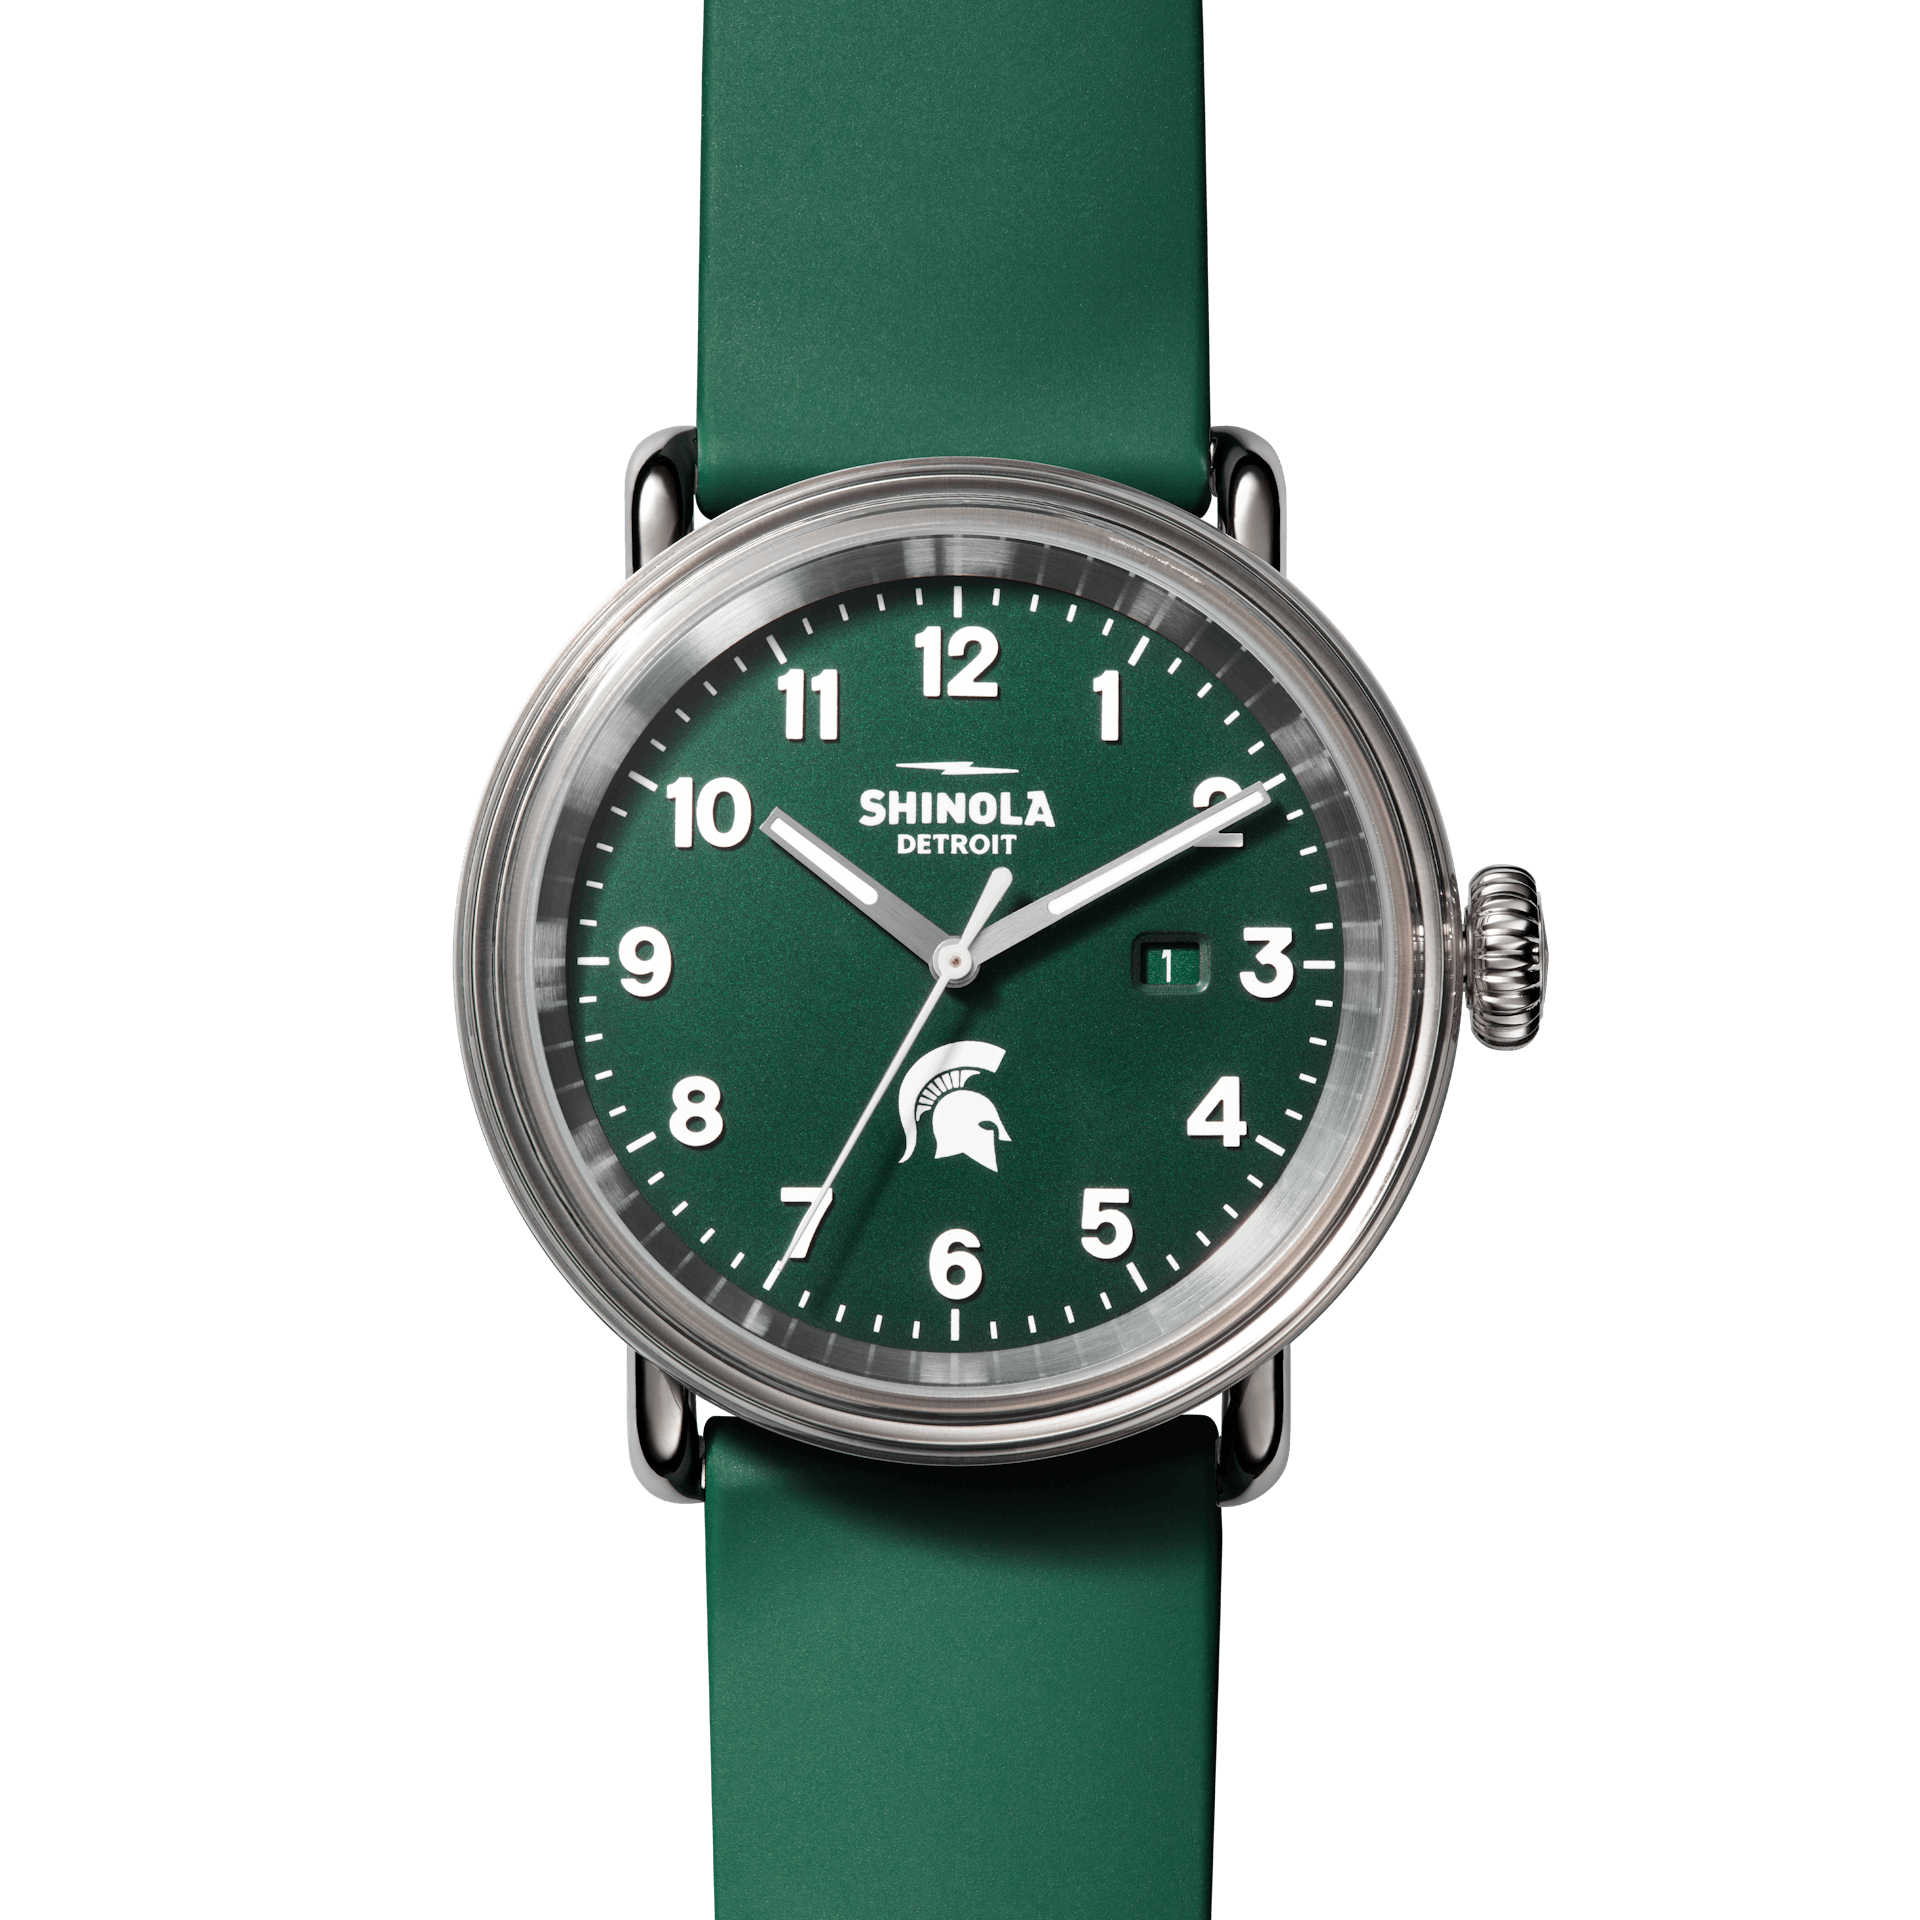 Some of Shinola's Most Interesting Watches Are on Sale - InsideHook